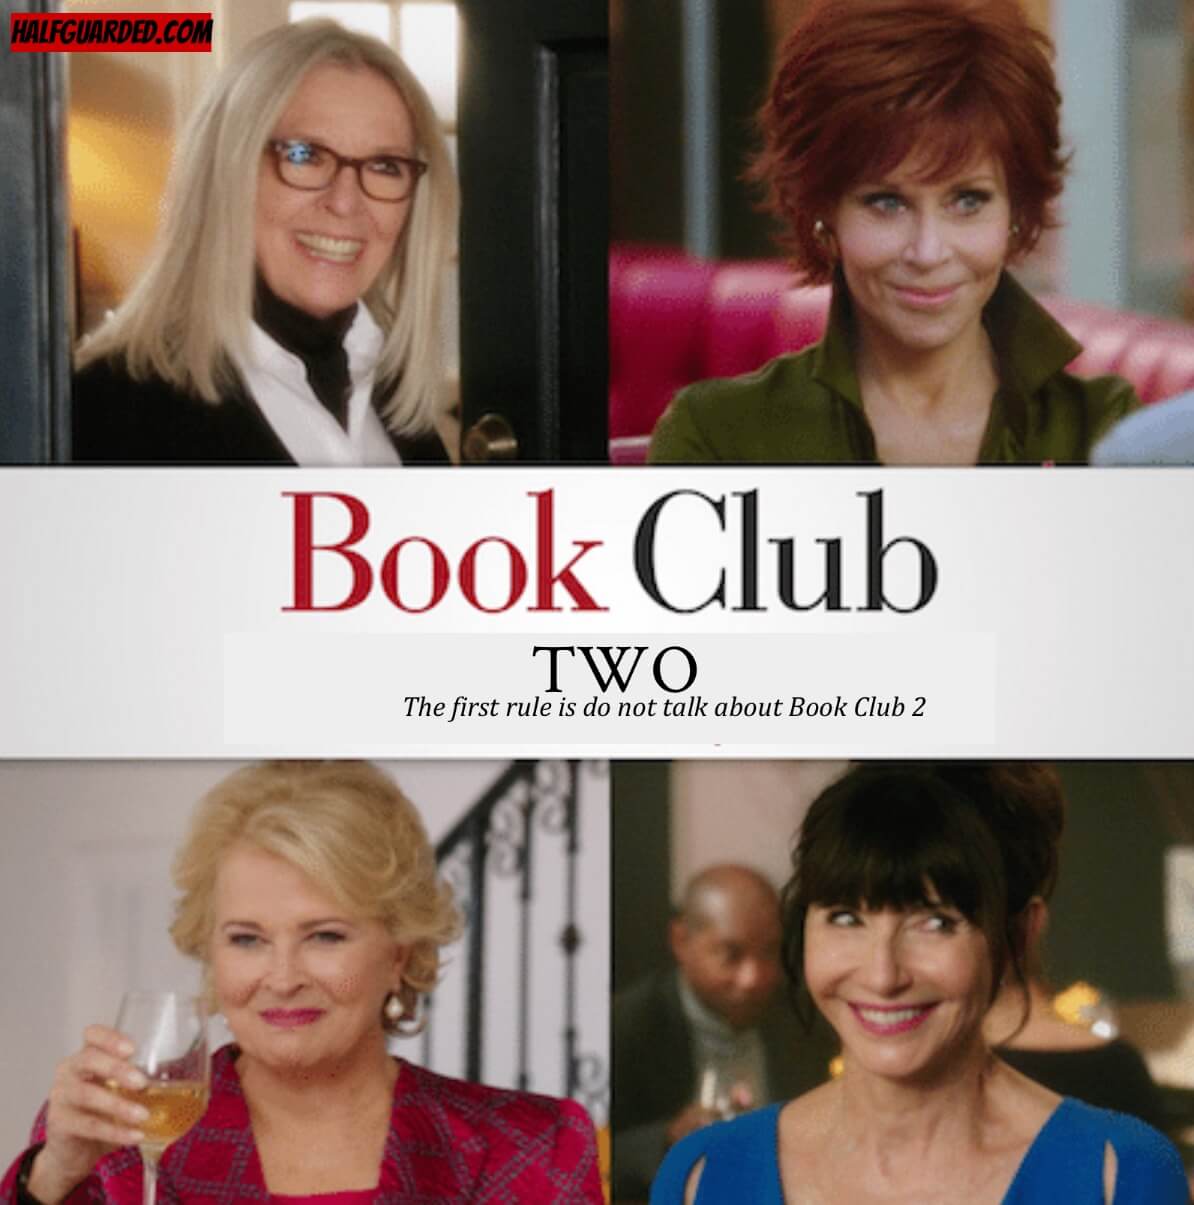 The Book Club 2 (2021) RUMORS, Plot, Cast, and Release Date News WILL